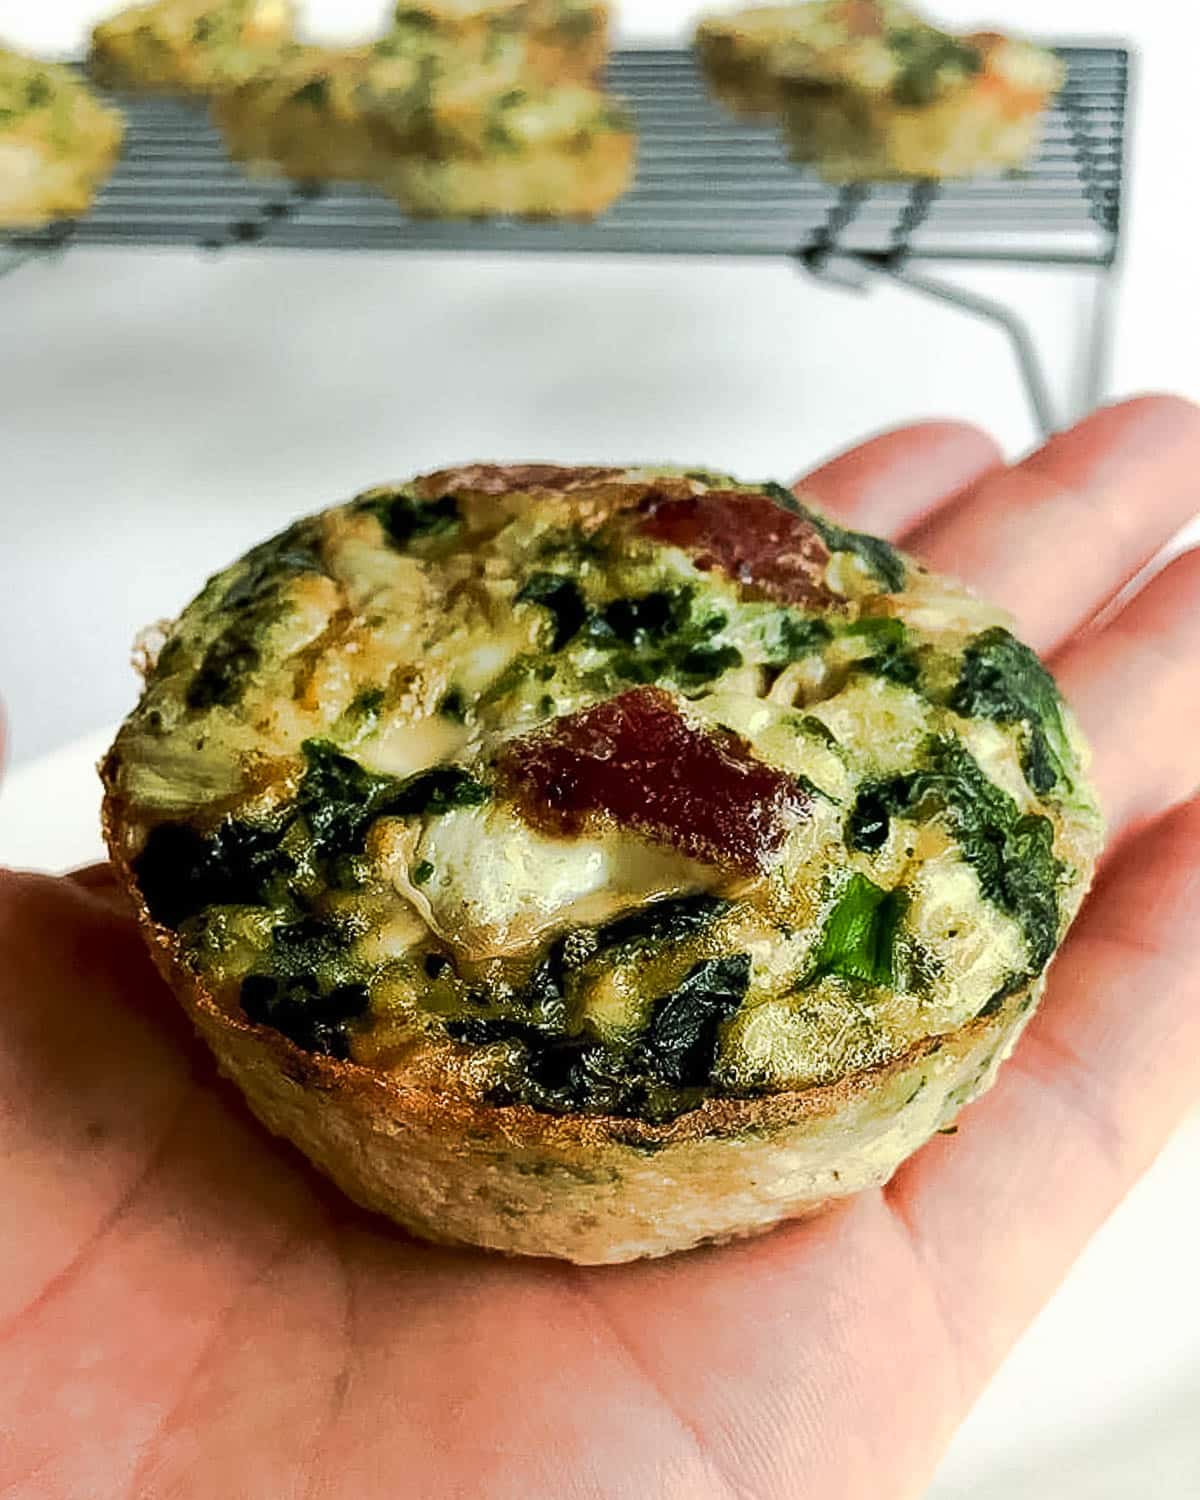 Bacon, Spinach and Tomato Egg Bites - The BakerMama